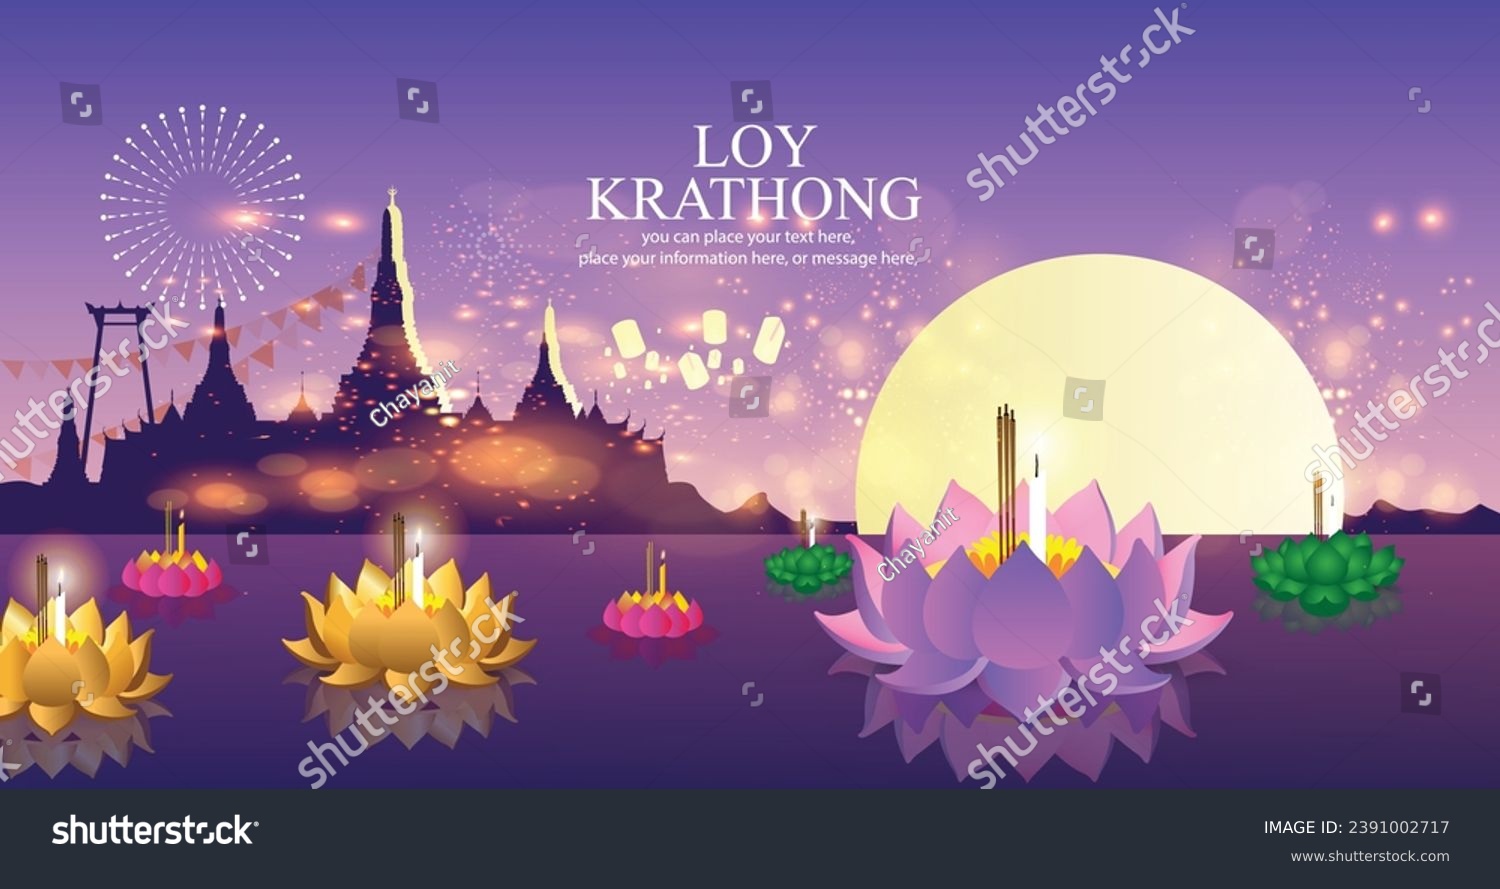 SVG of Floating lantern, Loy Krathong and Yi Peng lantern festival in Chiang Mai, thailand, banner on full moon and firework righting night and Culture of Thailand vector illustration purple background svg